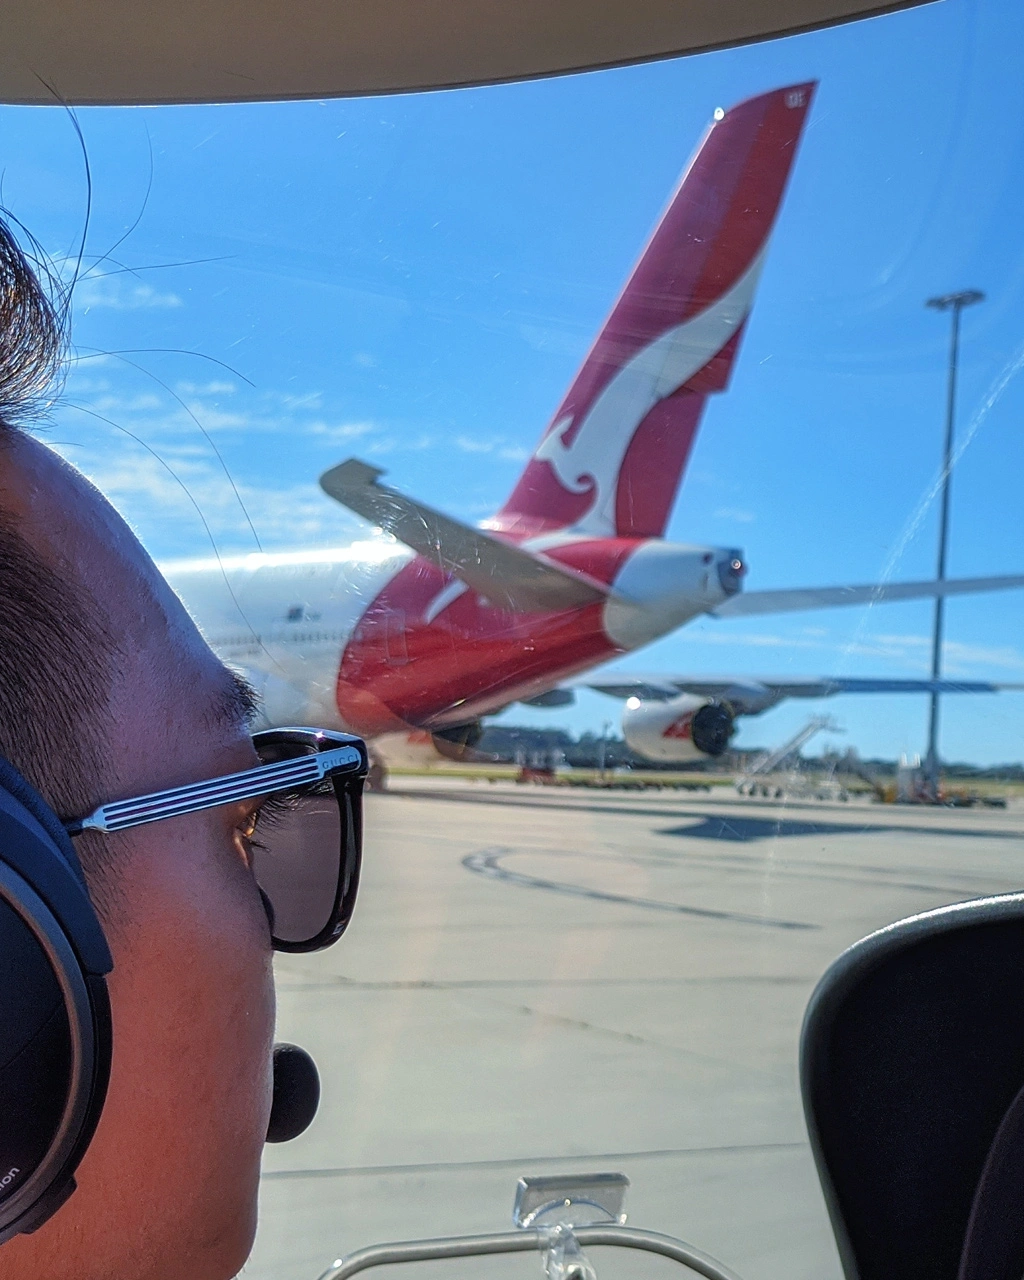 Step By Step Guide to the Qantas Airline Pilot Selection Process